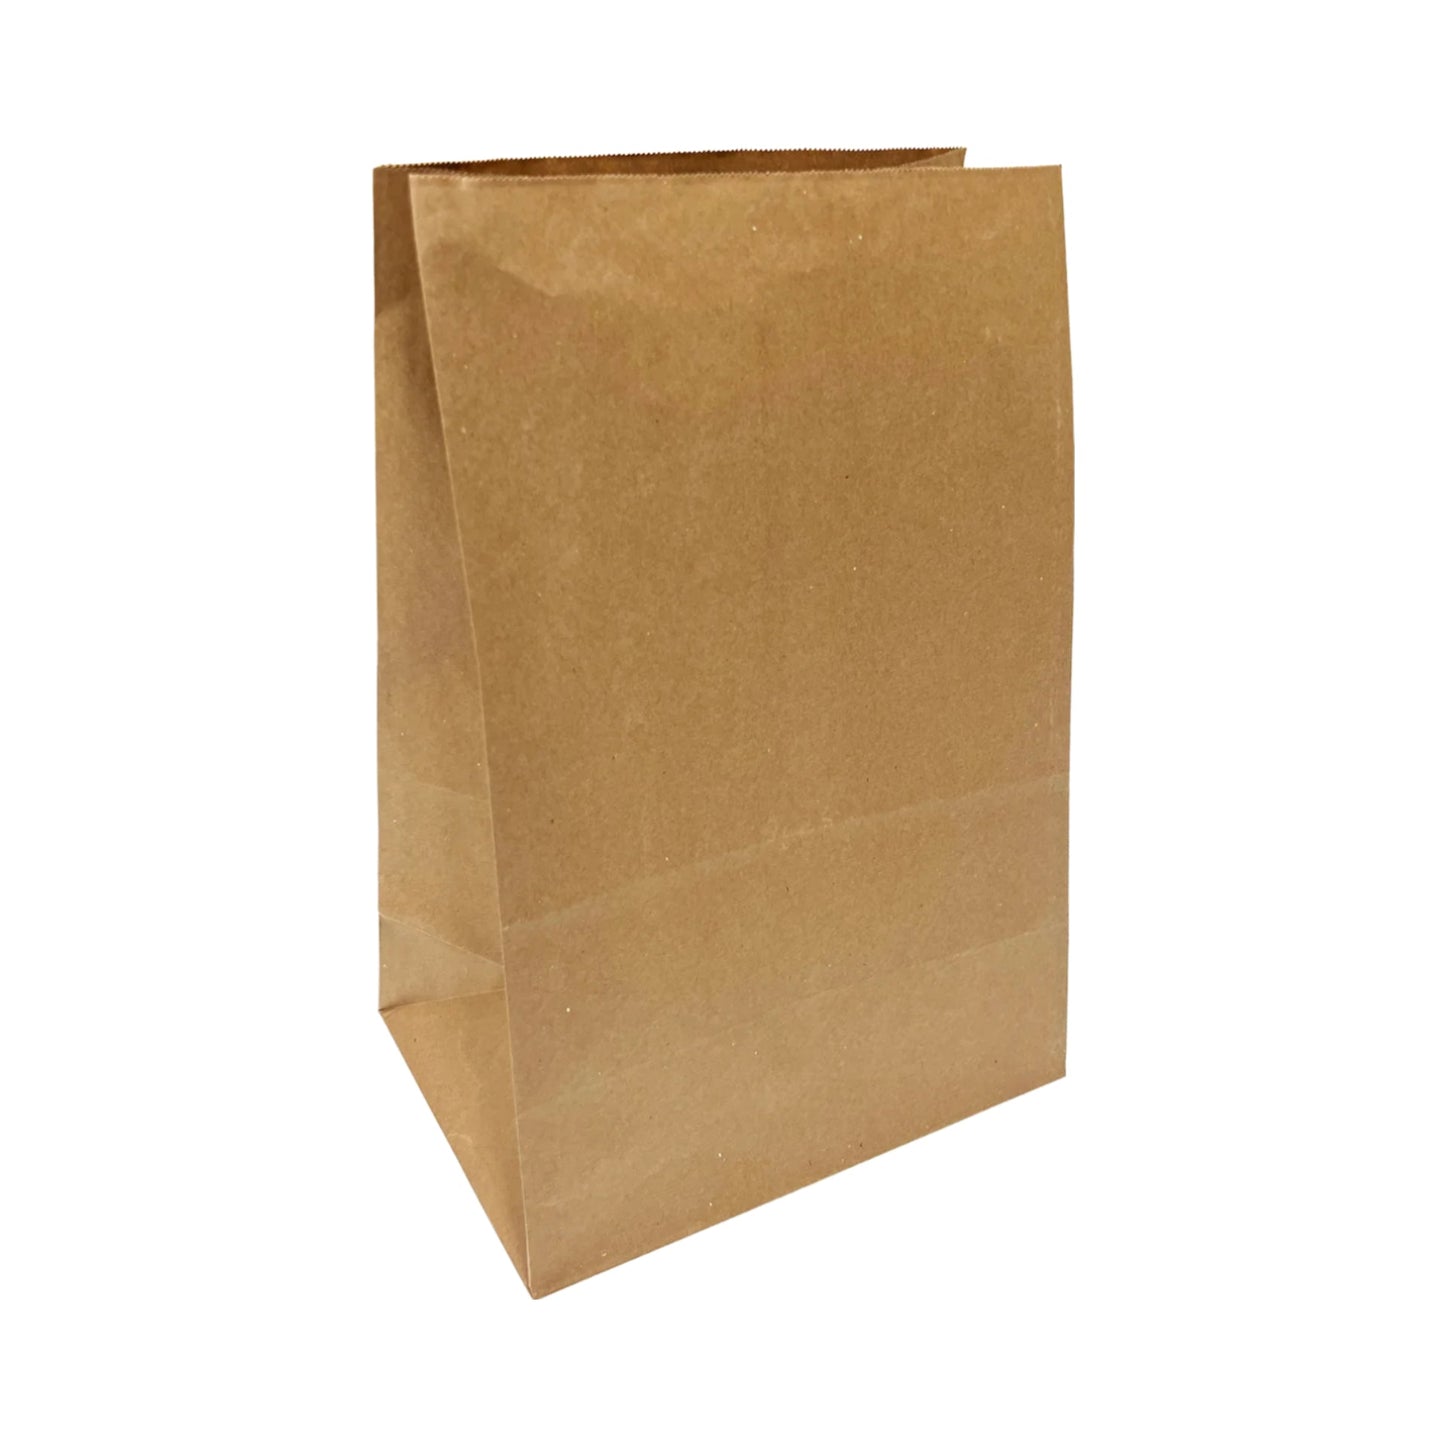 500pcs #8 Grocery Bags 6.25x3.75x12 inches; $0.06/pc